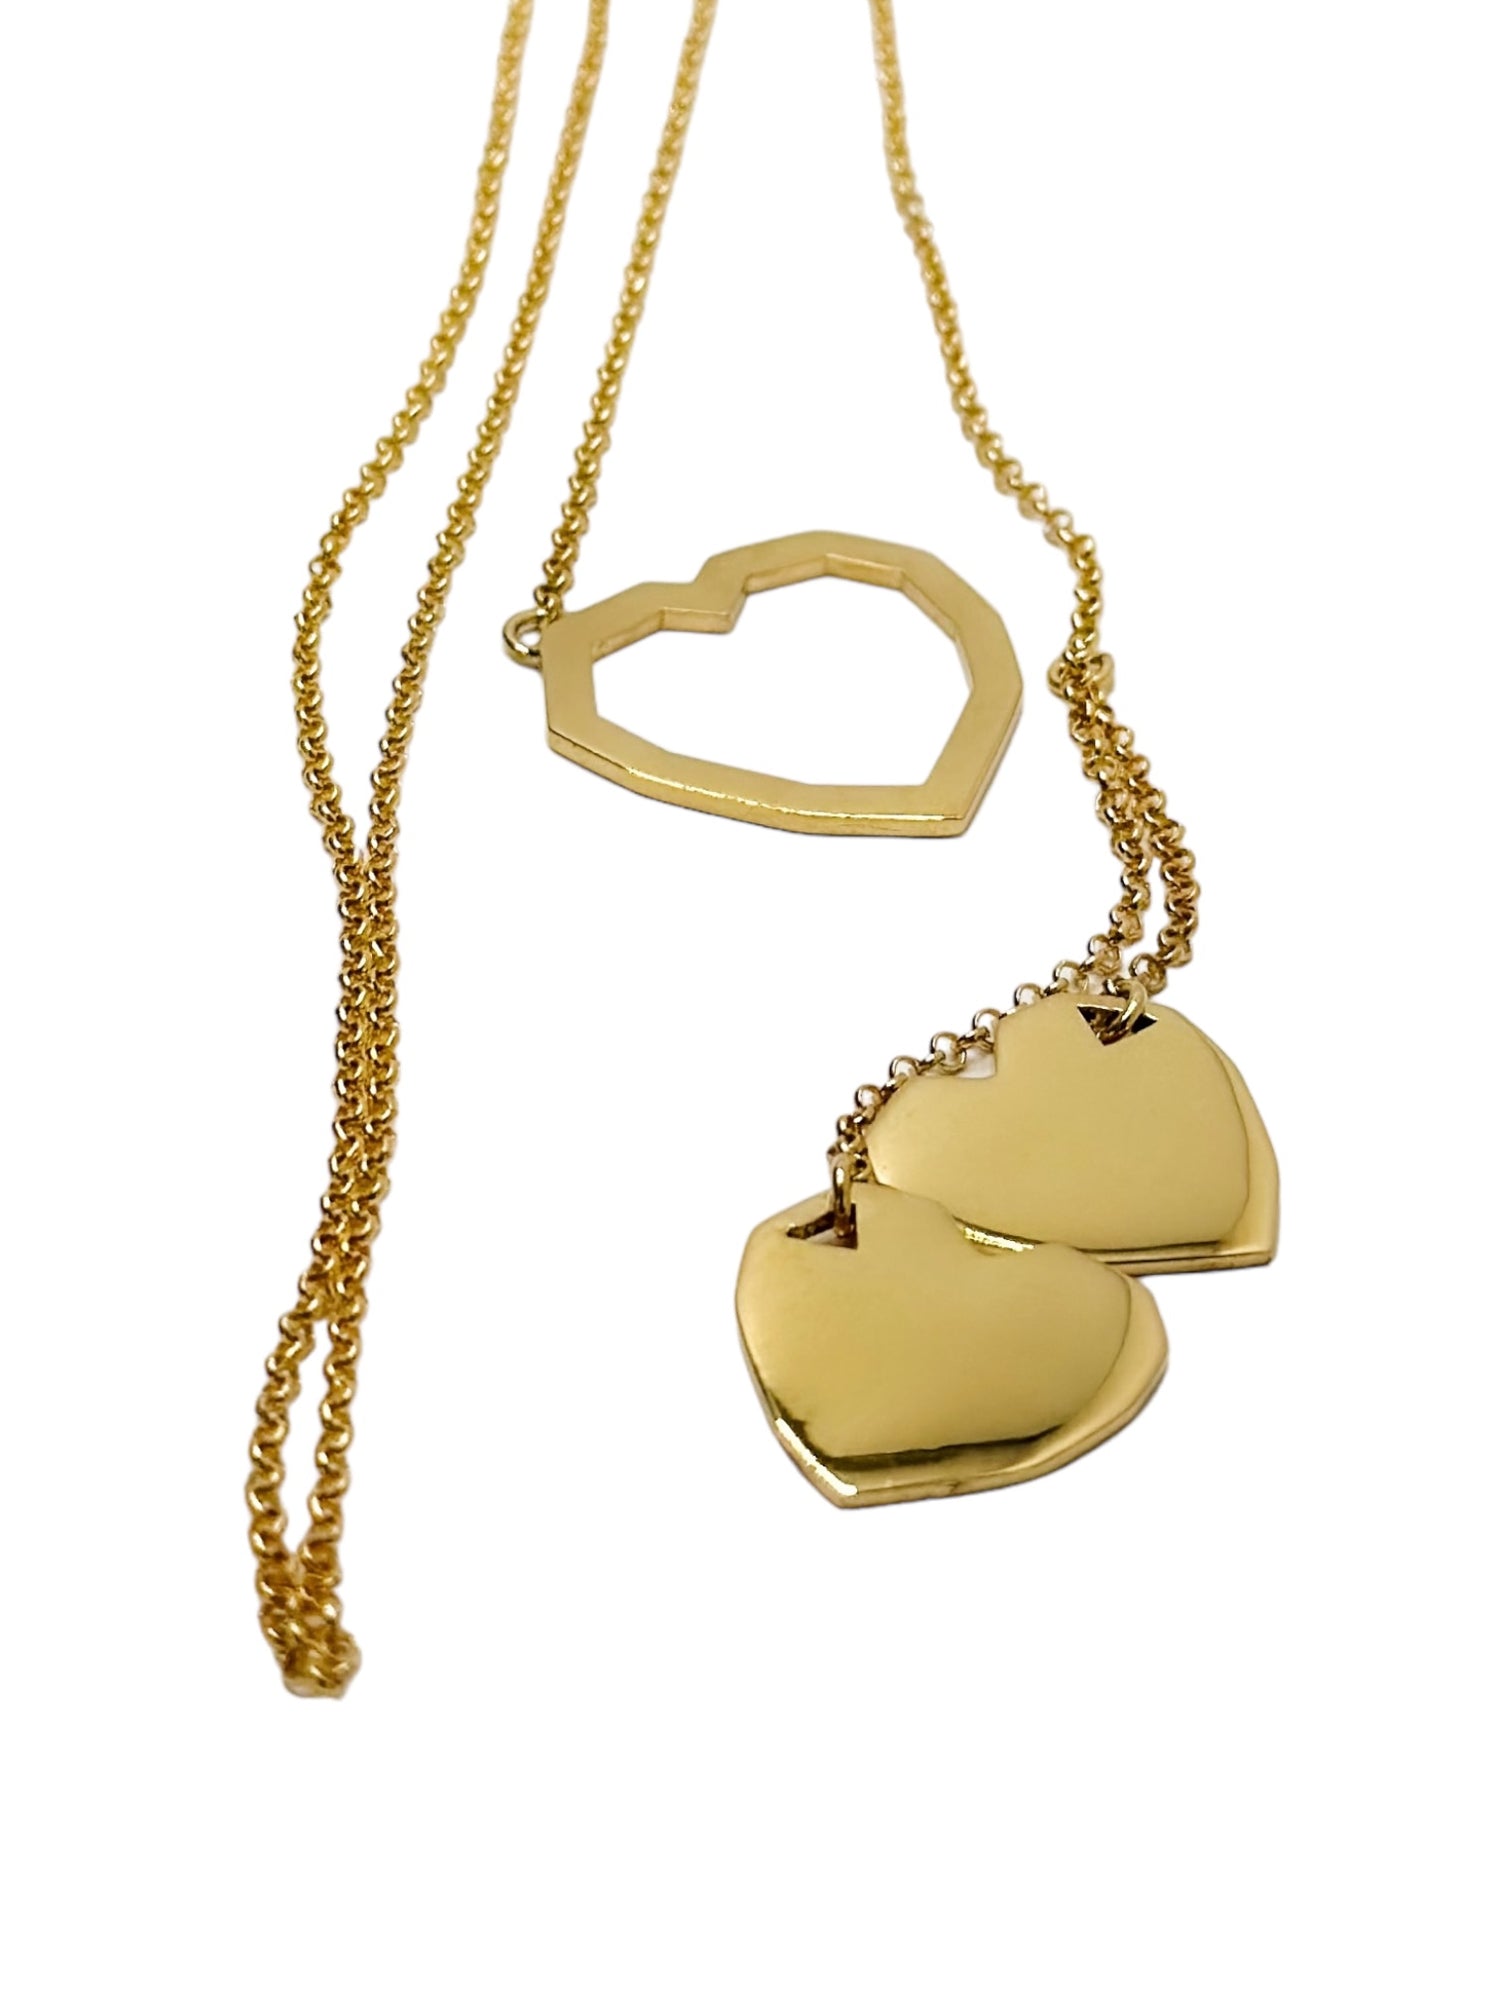 Heart to Heart Necklace from Love collection, 18-karat-gold-plated silver